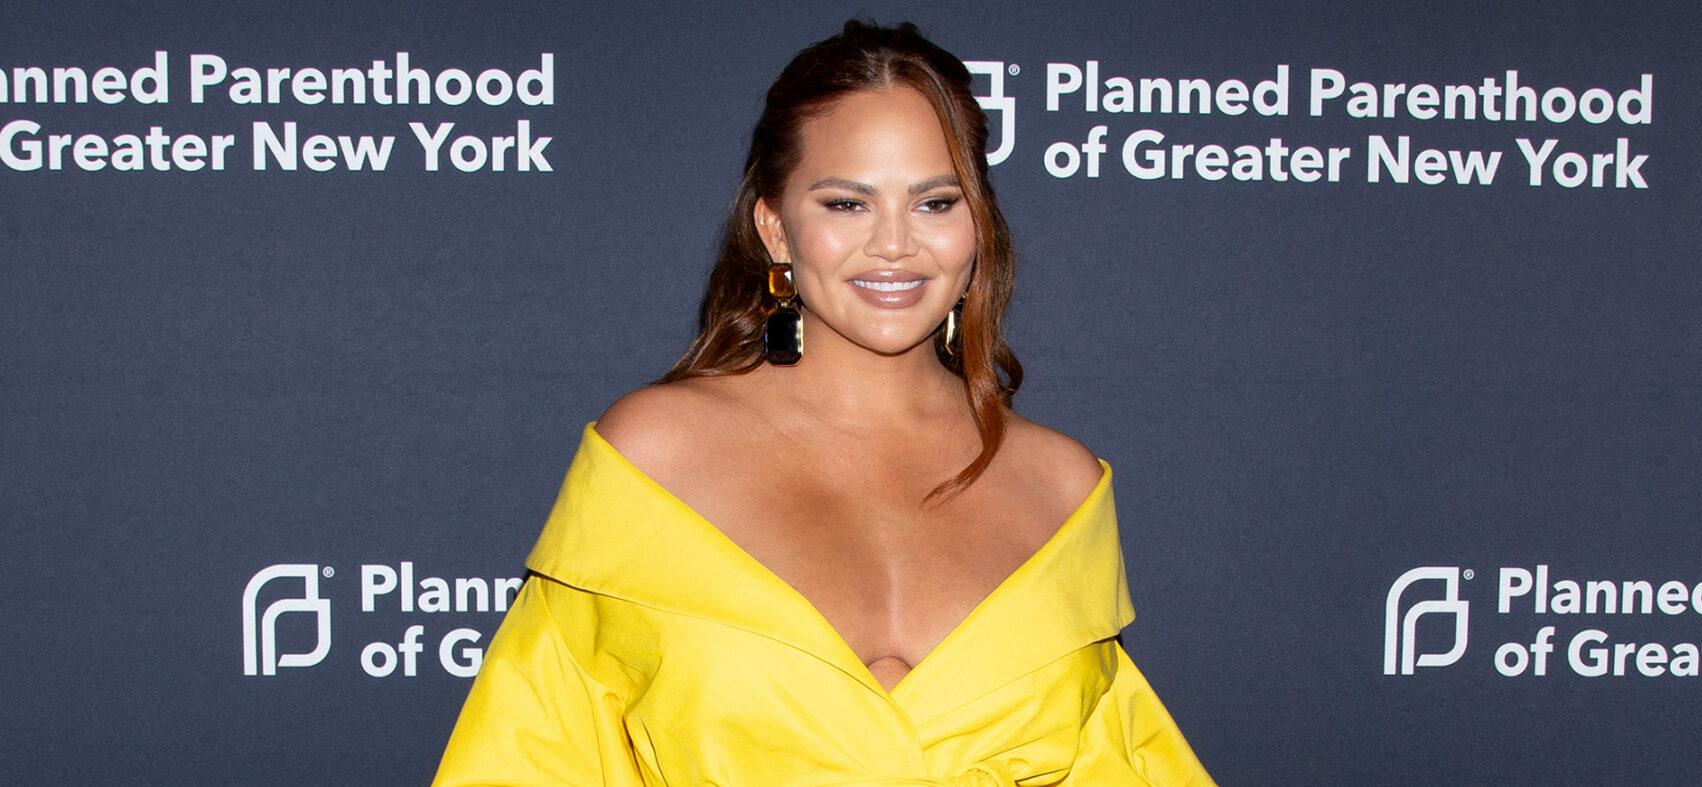 Chrissy Teigen at the Planned Parenthood "Spring Into Action" Gala The Glasshouse, NY.